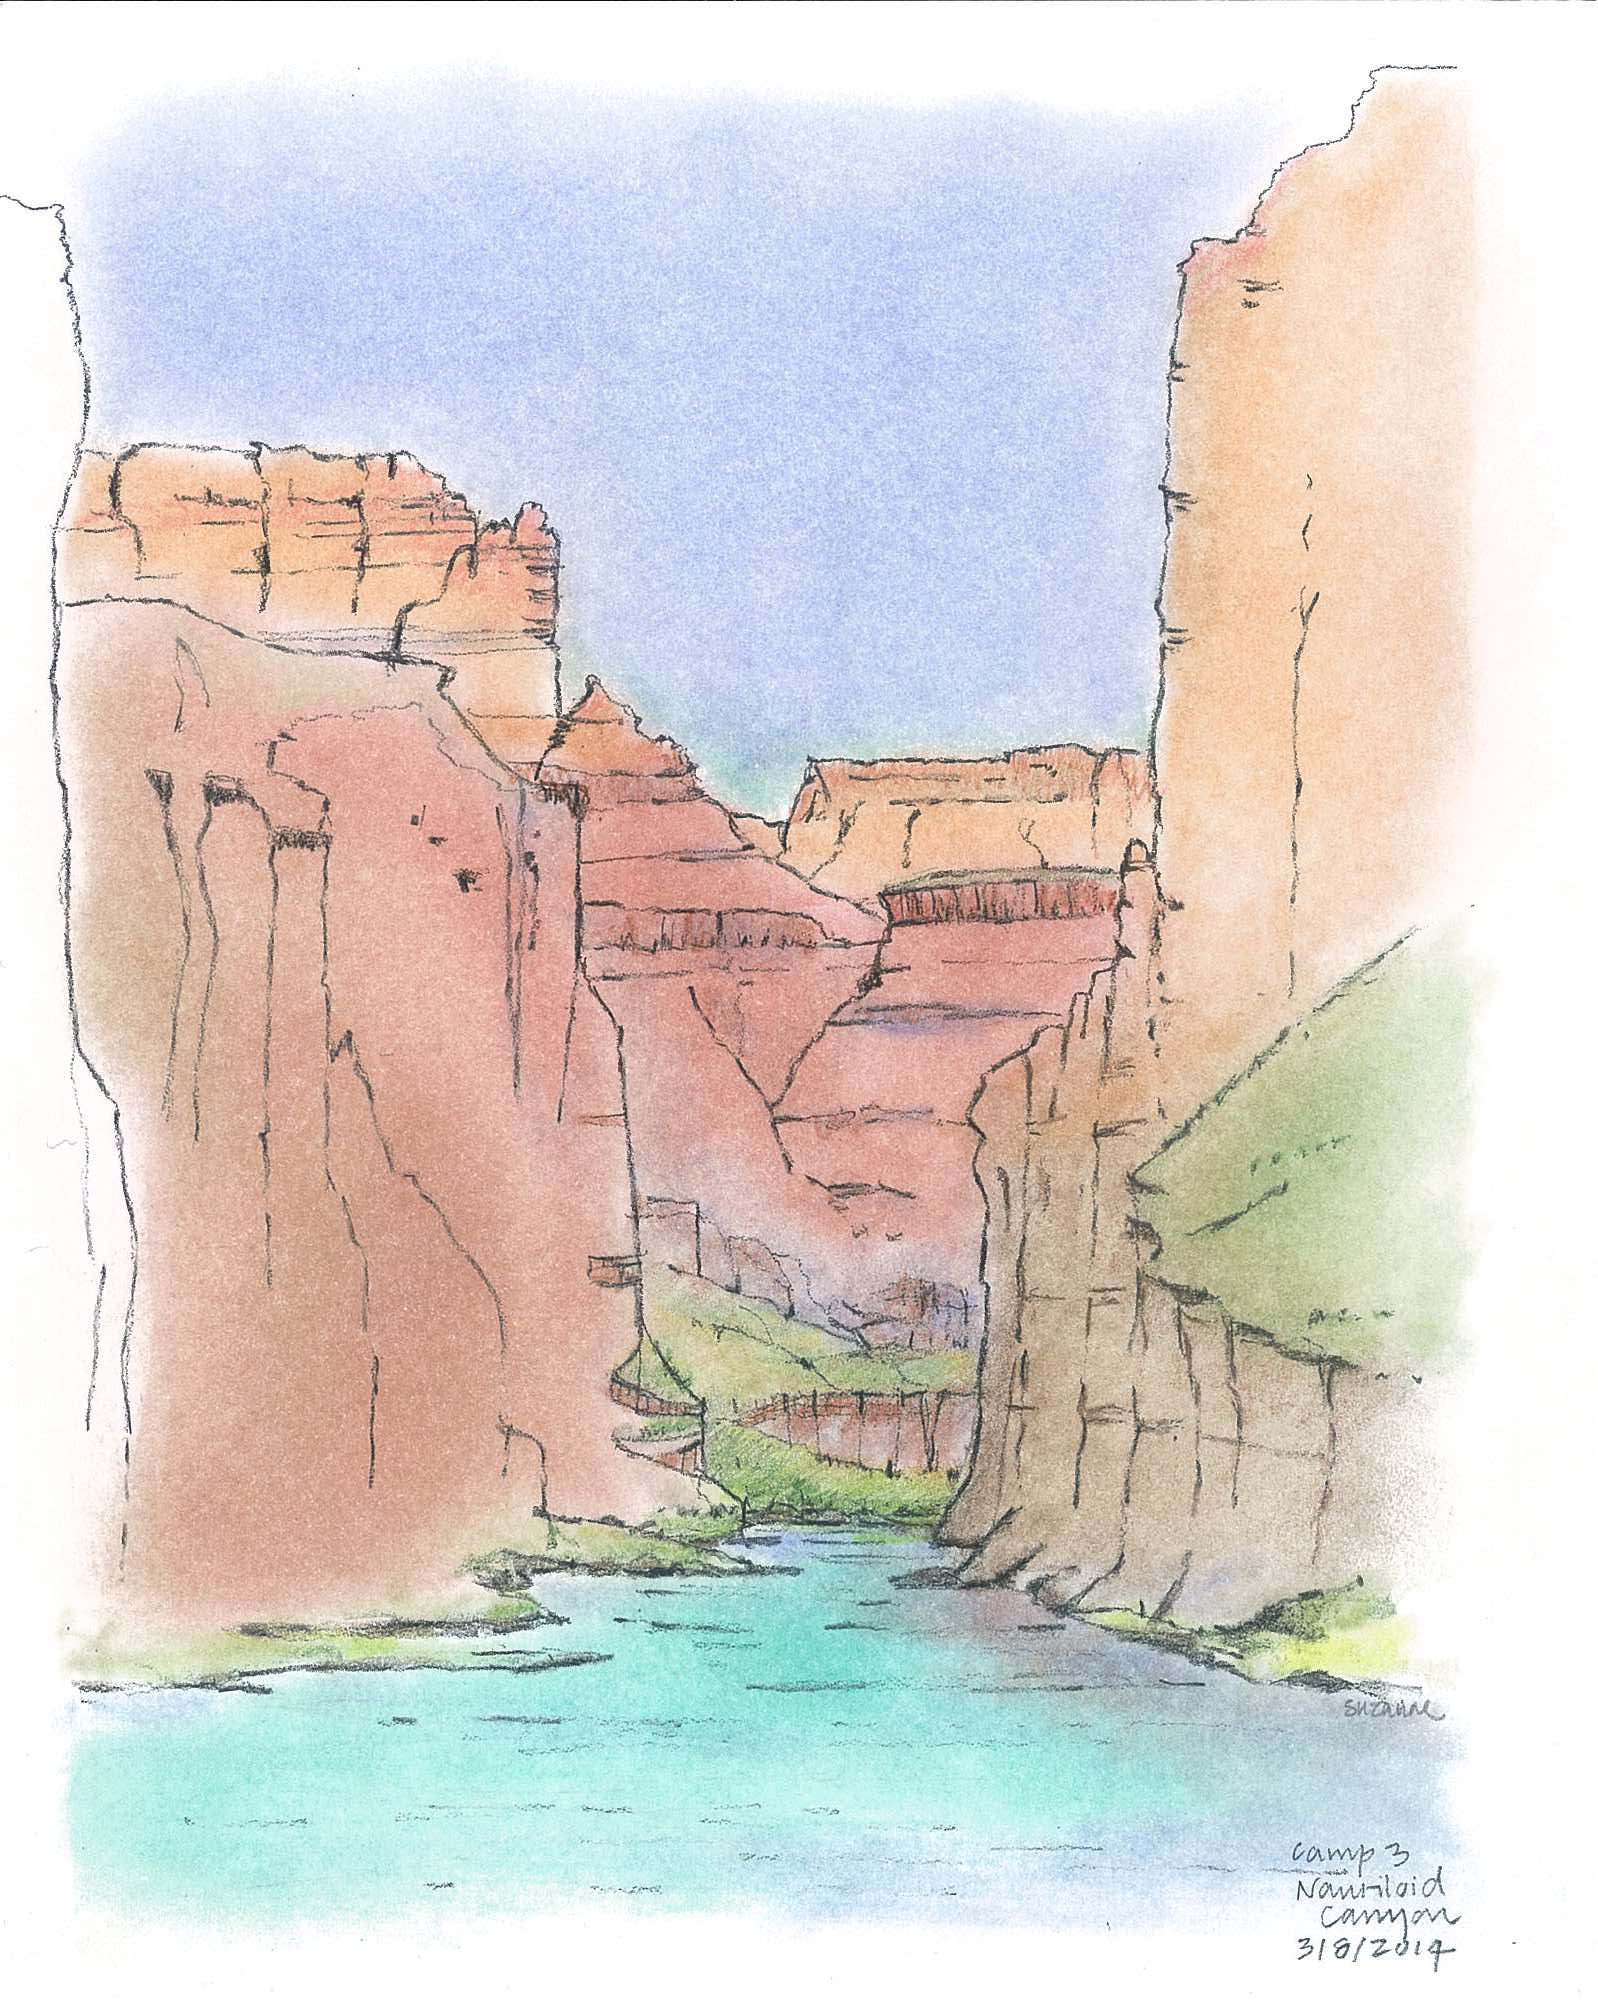 Grand Canyon Sketch at Explore collection of Grand